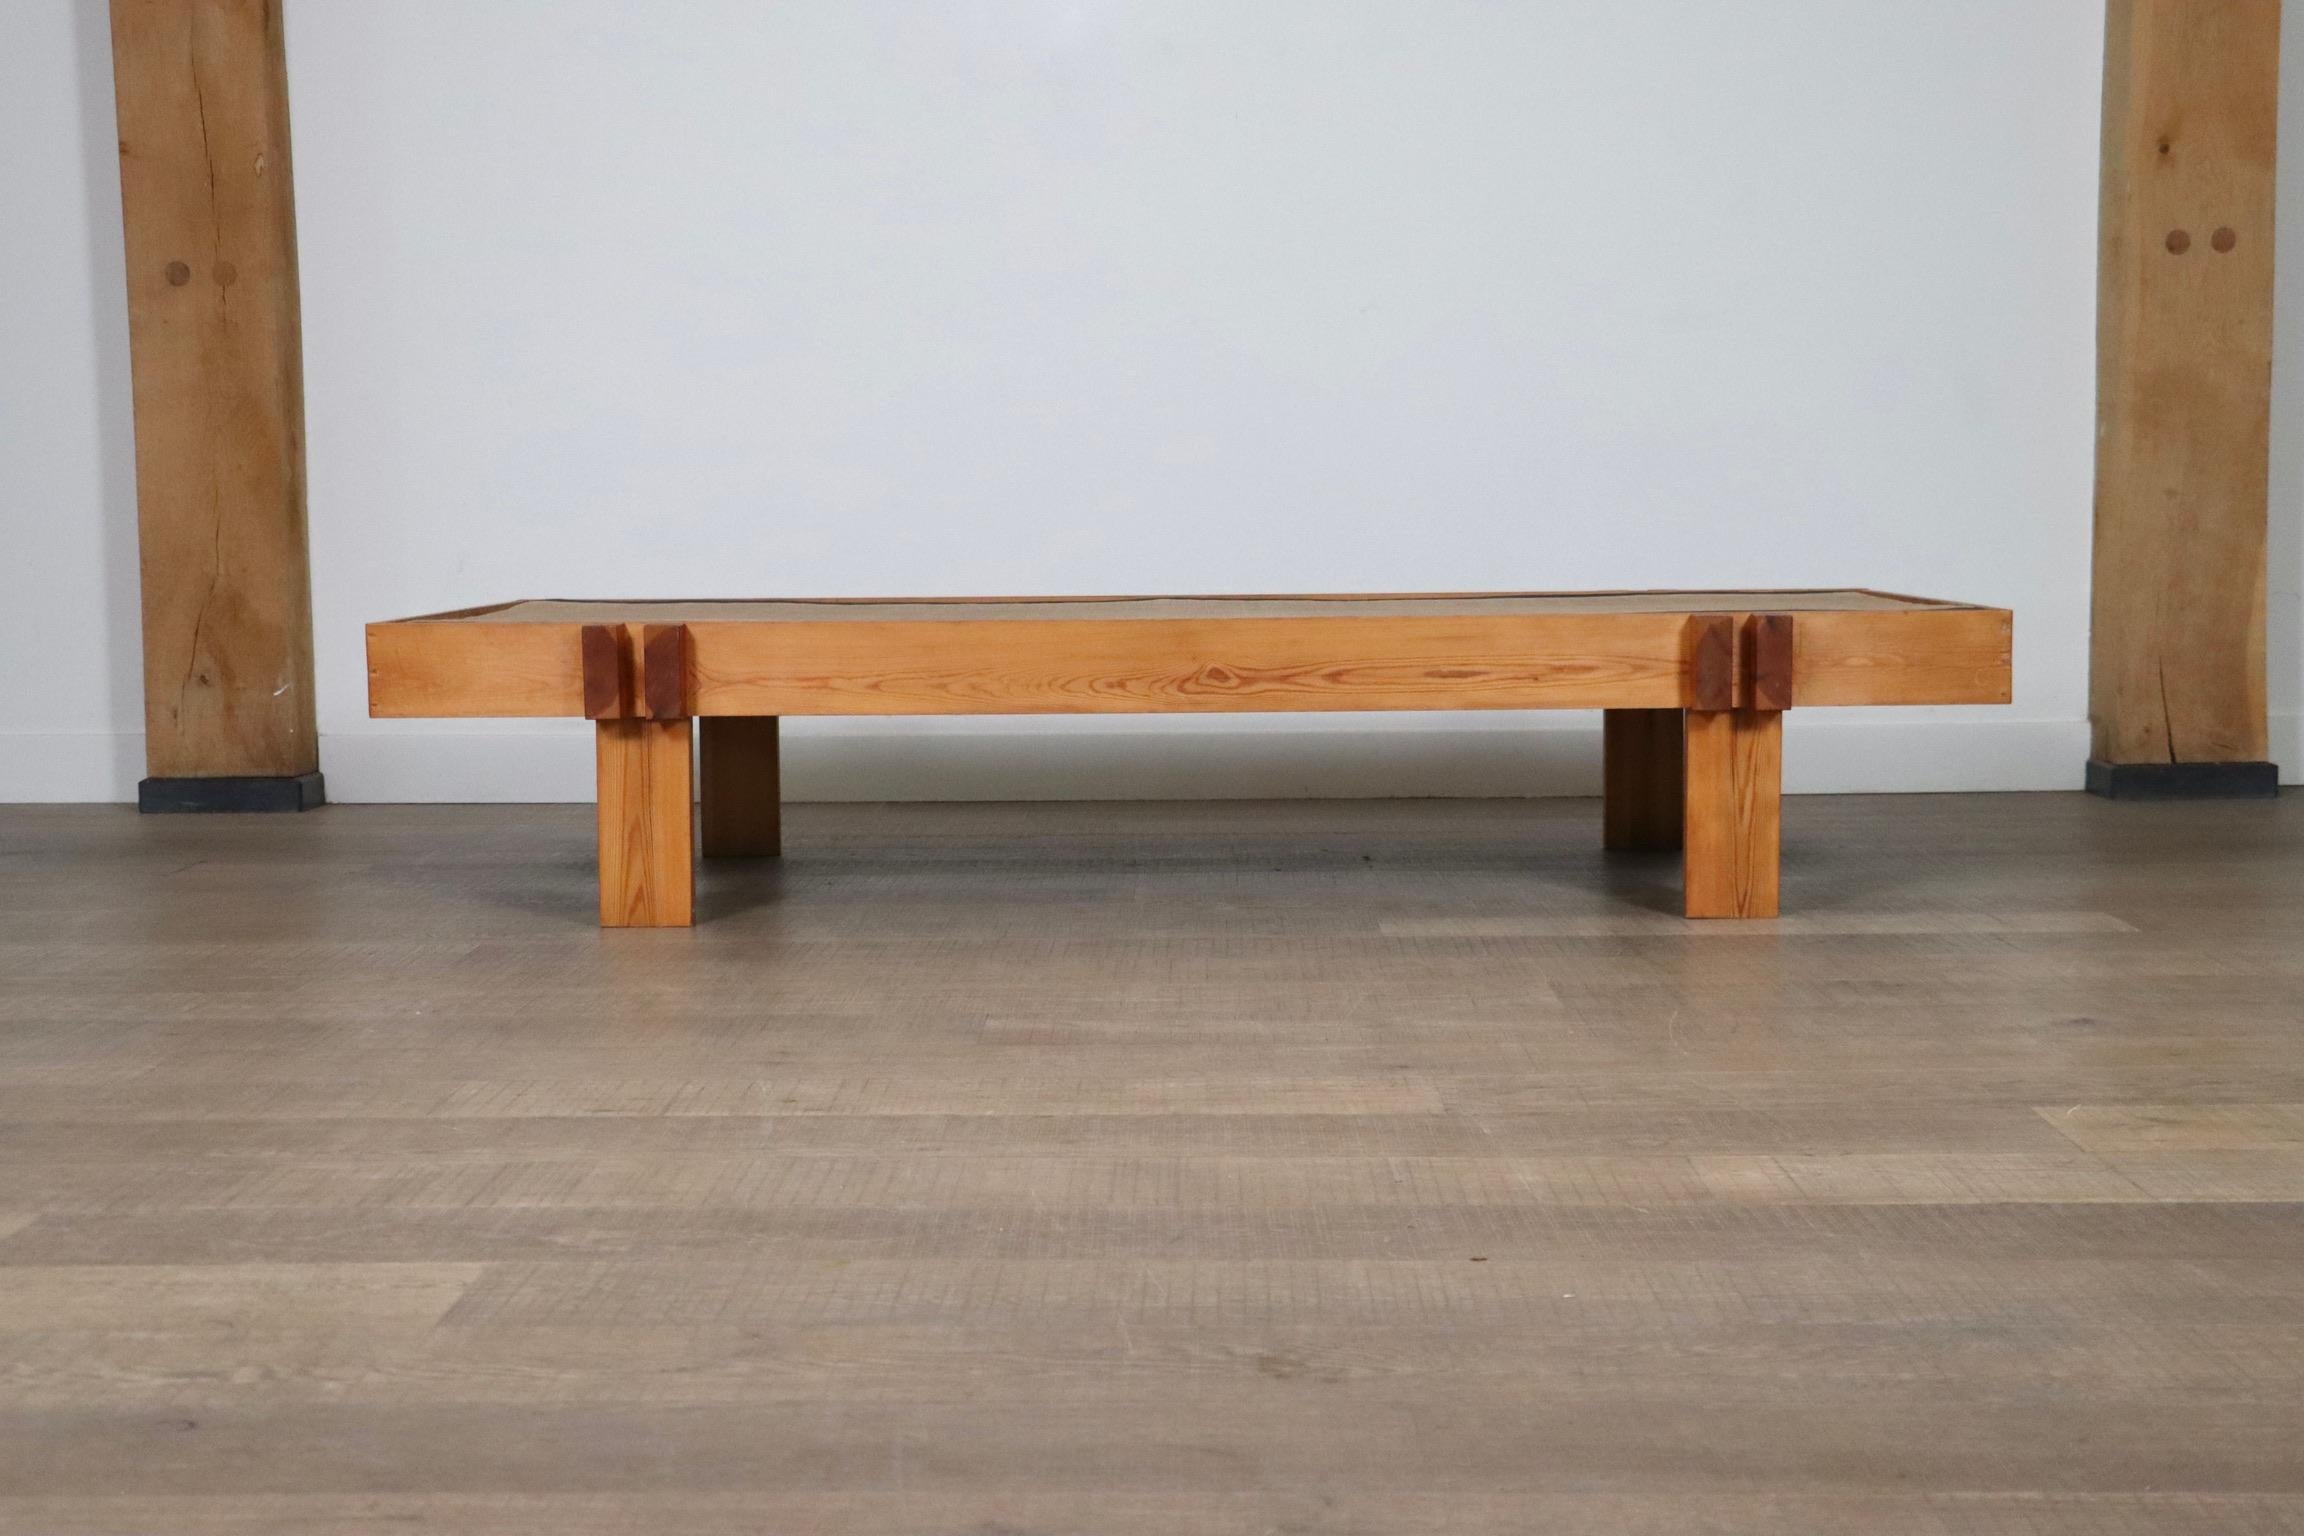 Midcentury Japanese Coffee Table In Wood And Seagrass, Japan, 1960s For Sale 2